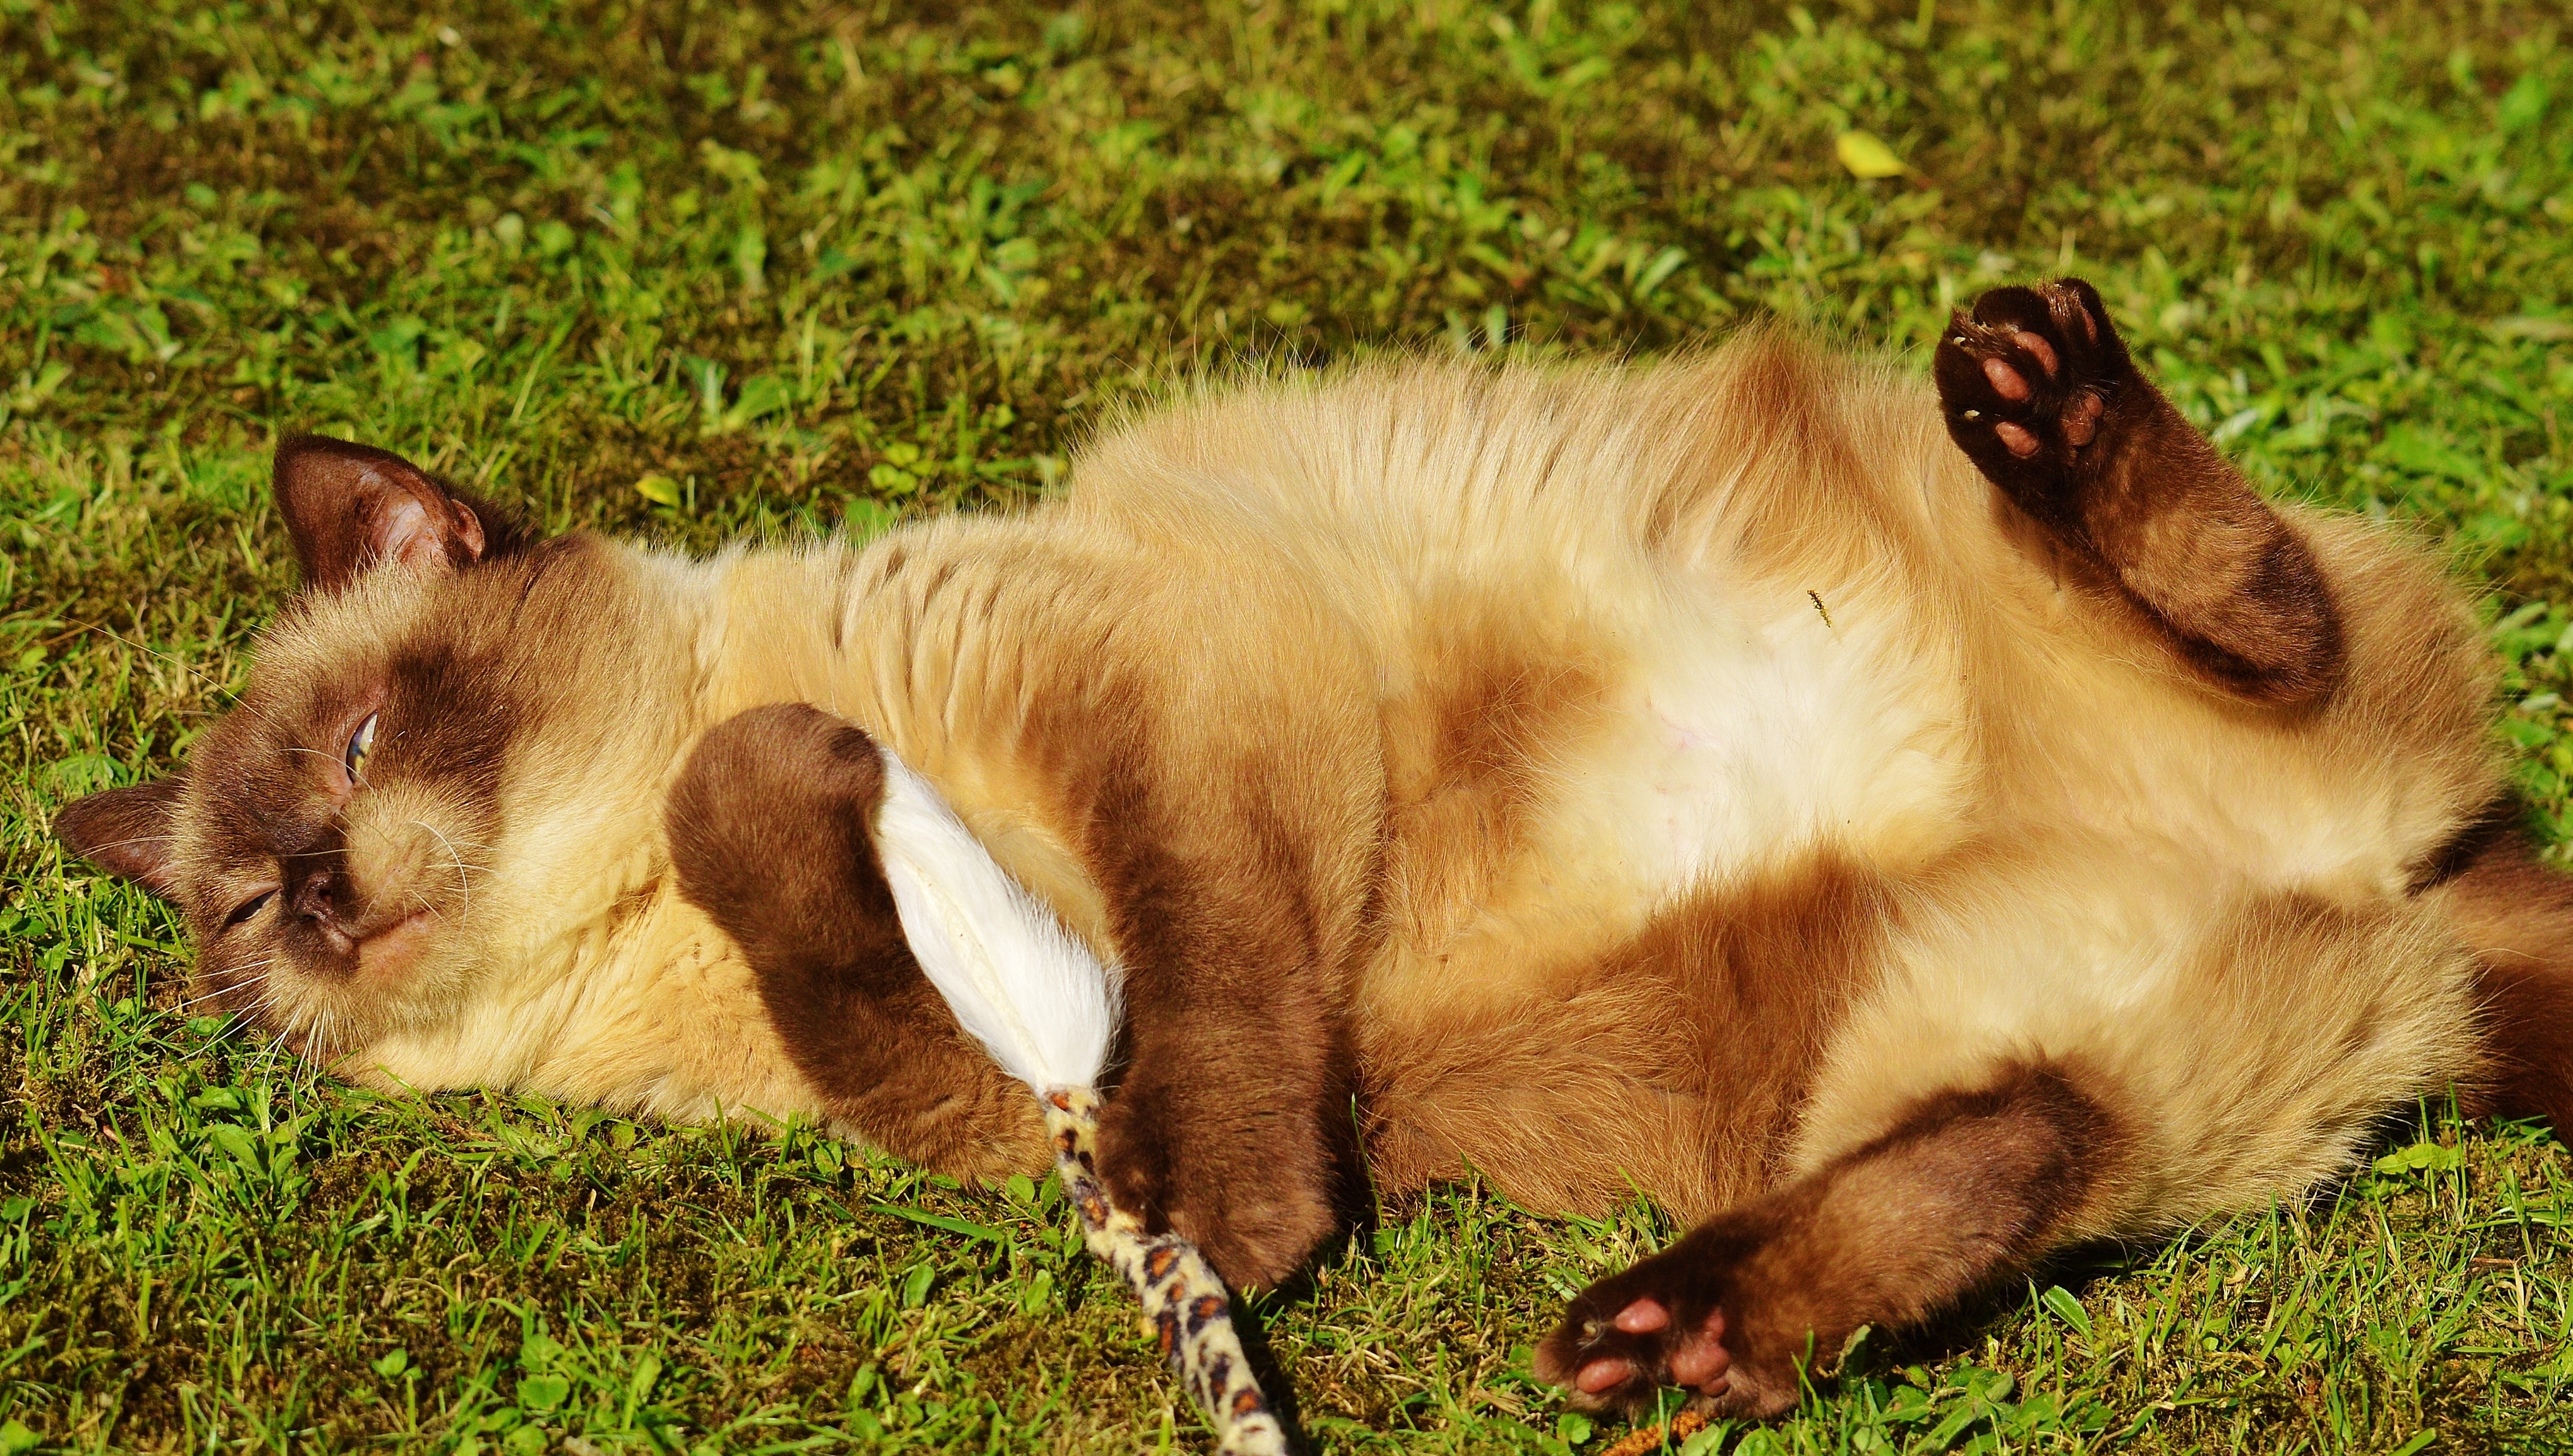 himalayan cat laying on grass field during daytime